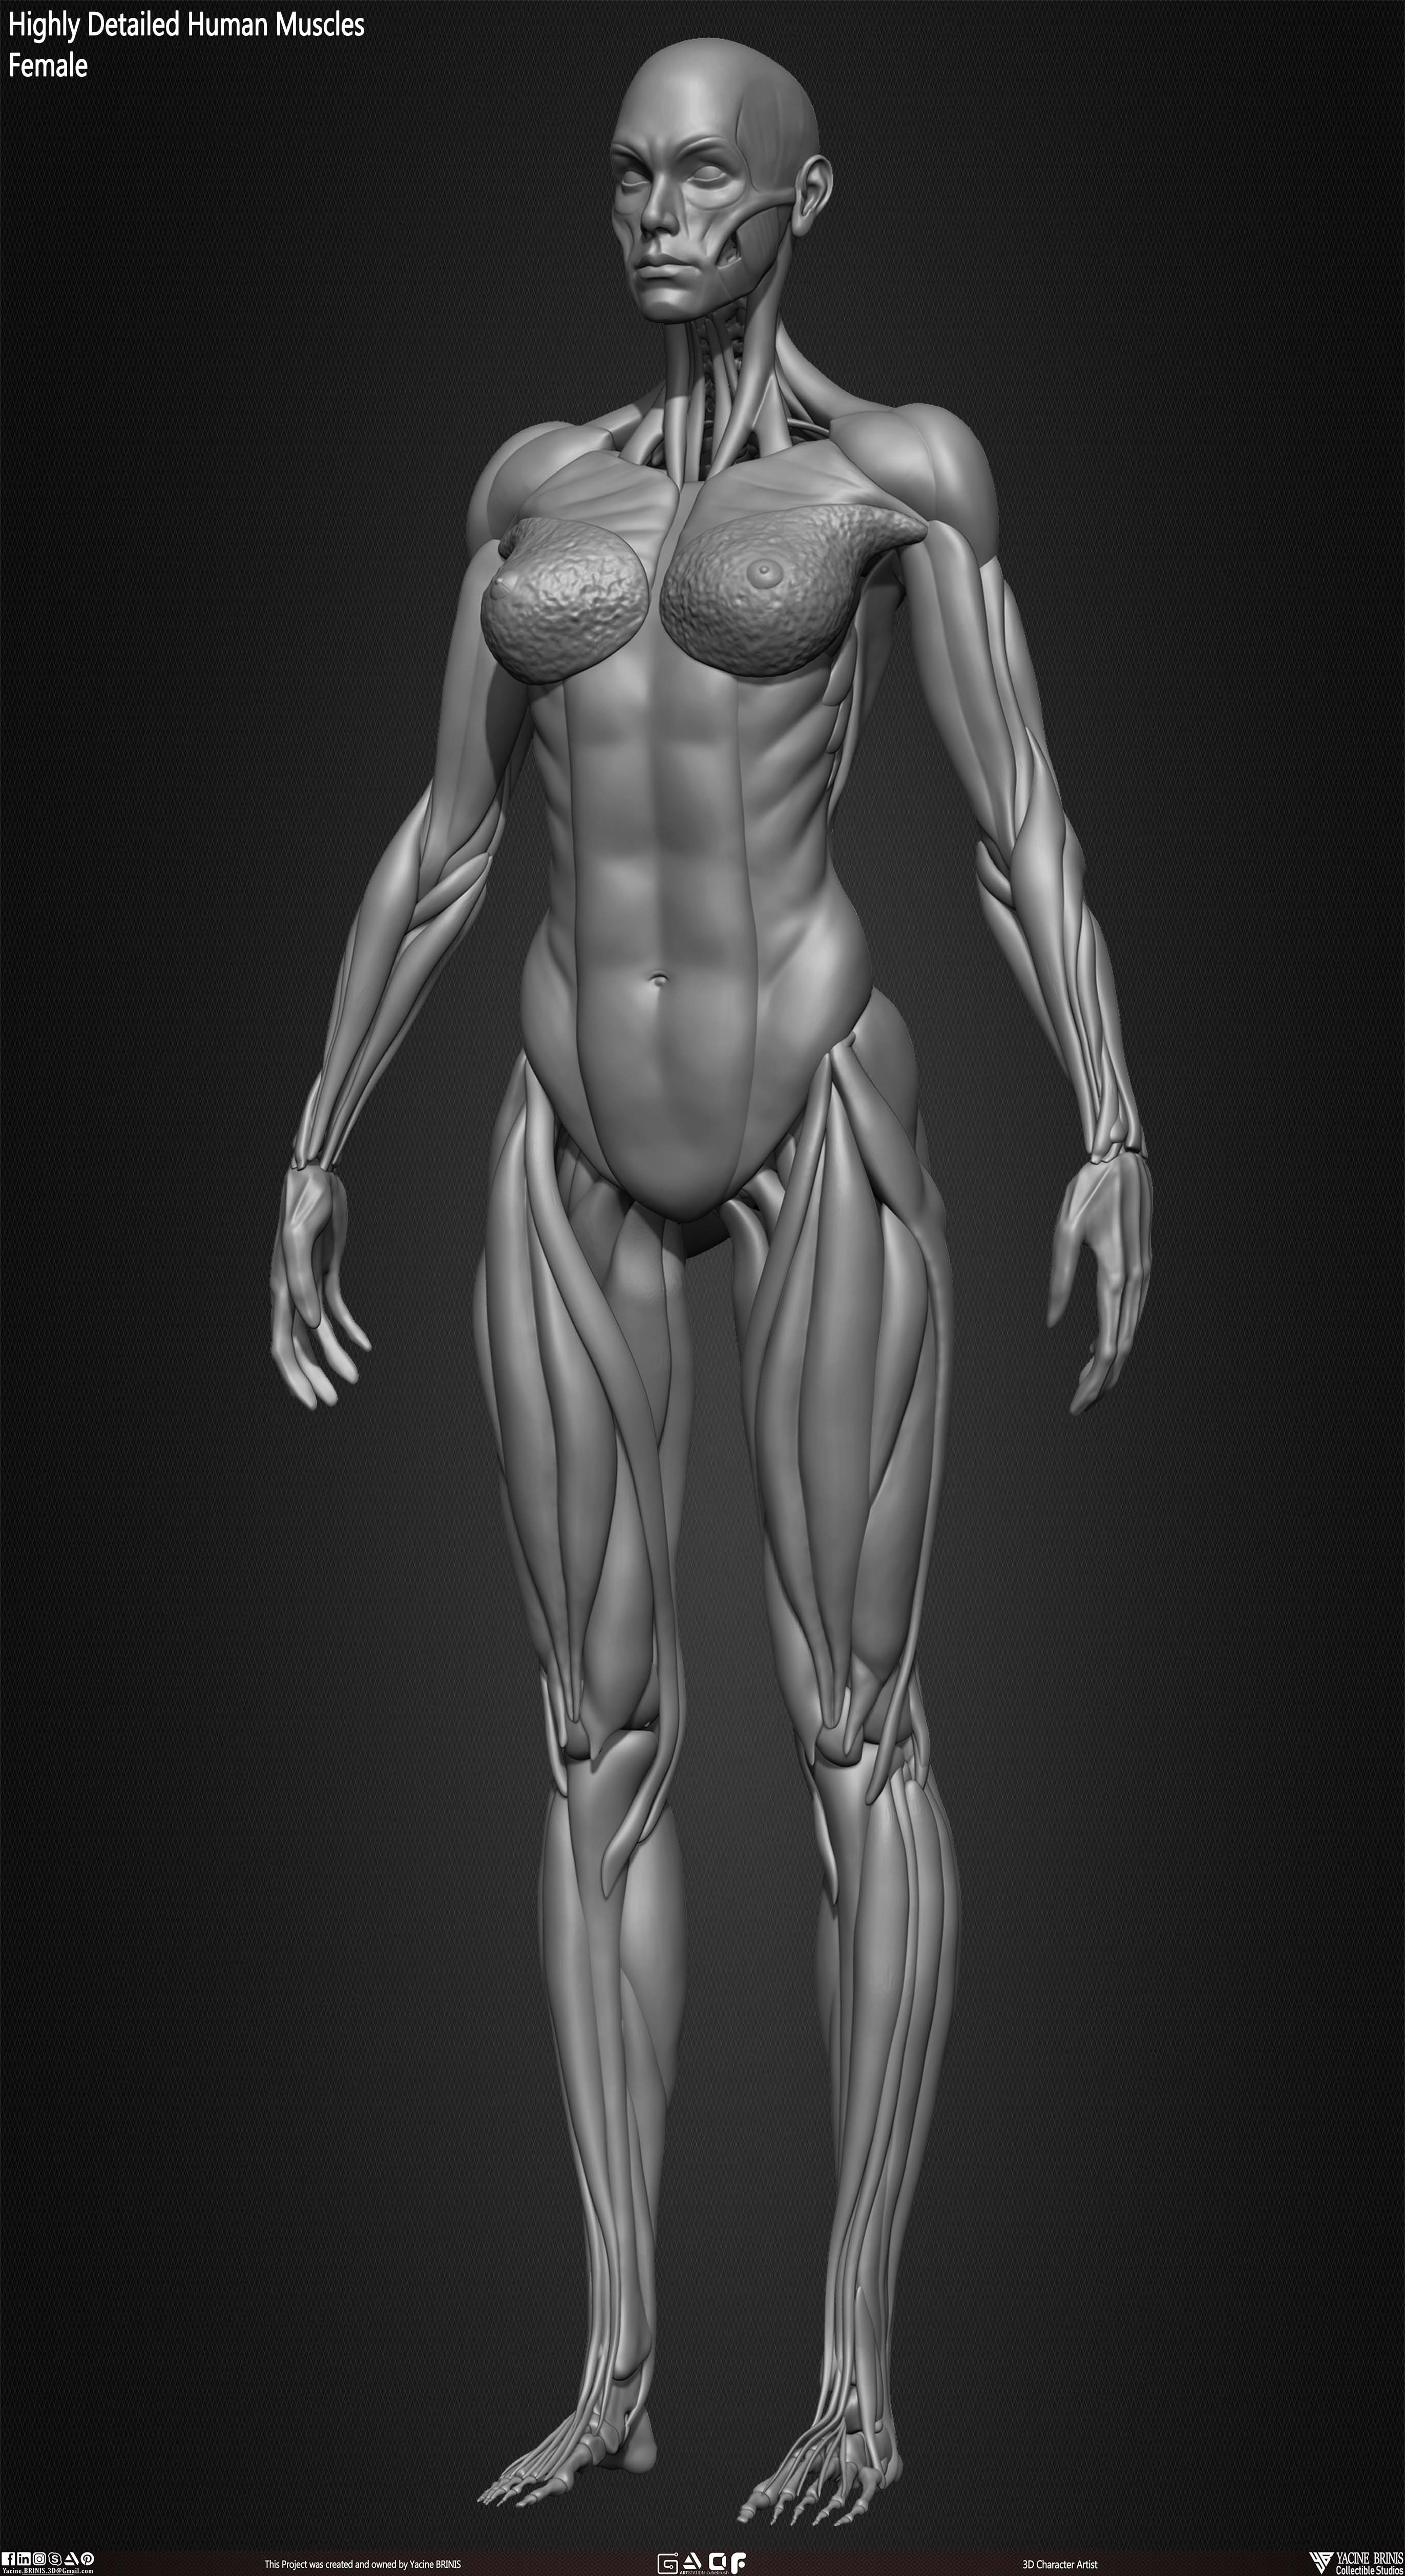 Female Human Muscles 3D Model sculpted by Yacine BRINIS 023